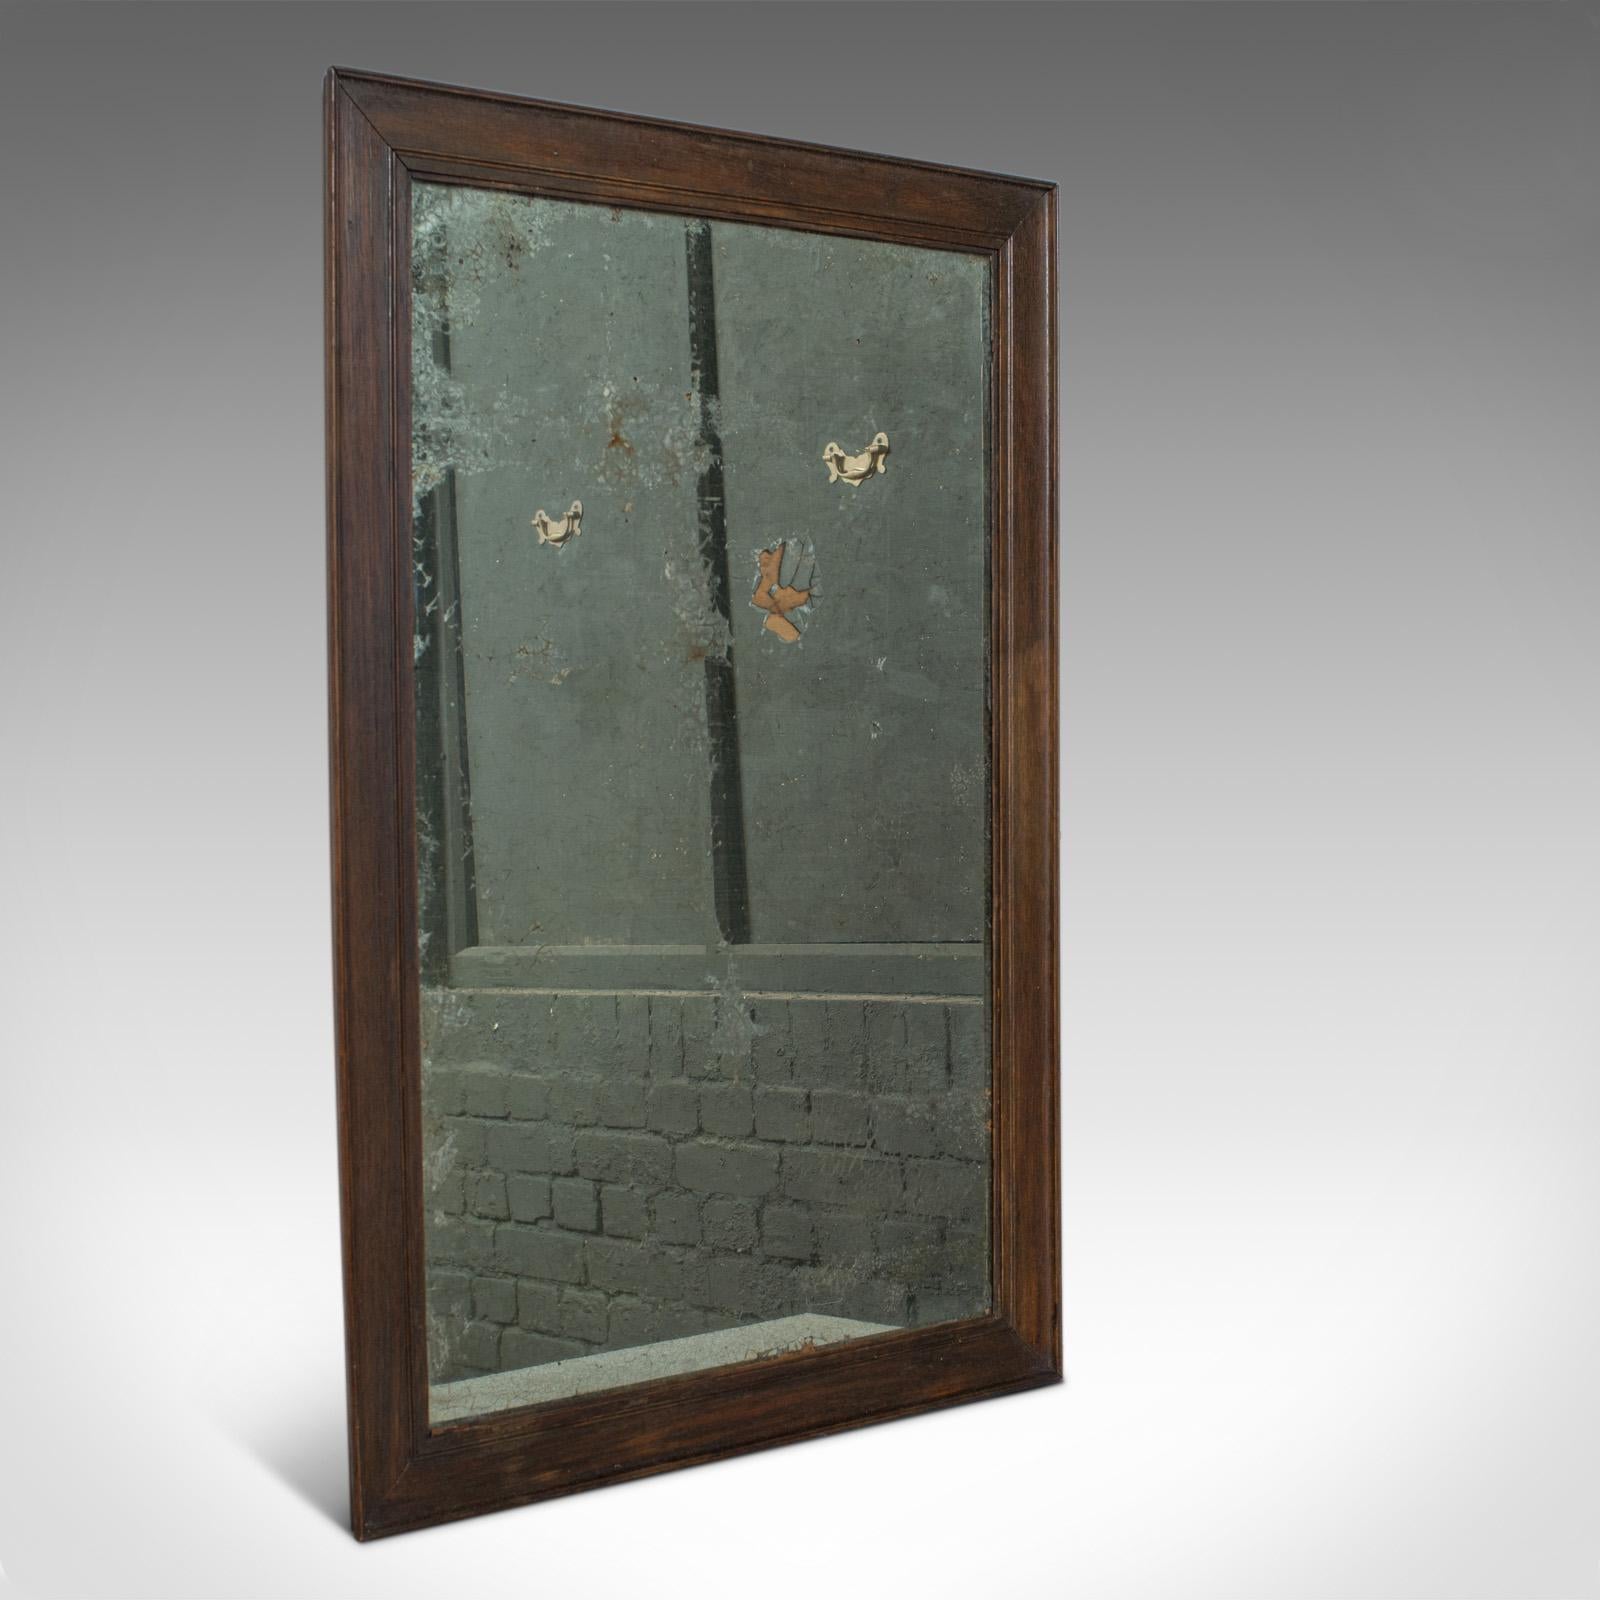 This is an antique wall mirror. An English, Victorian, distressed, oak mirror dating to the mid-19th century, circa 1850.

Substantial and reassuringly heavy
Beaded oak frame benefits from good, consistent color
Grain interest and a desirable